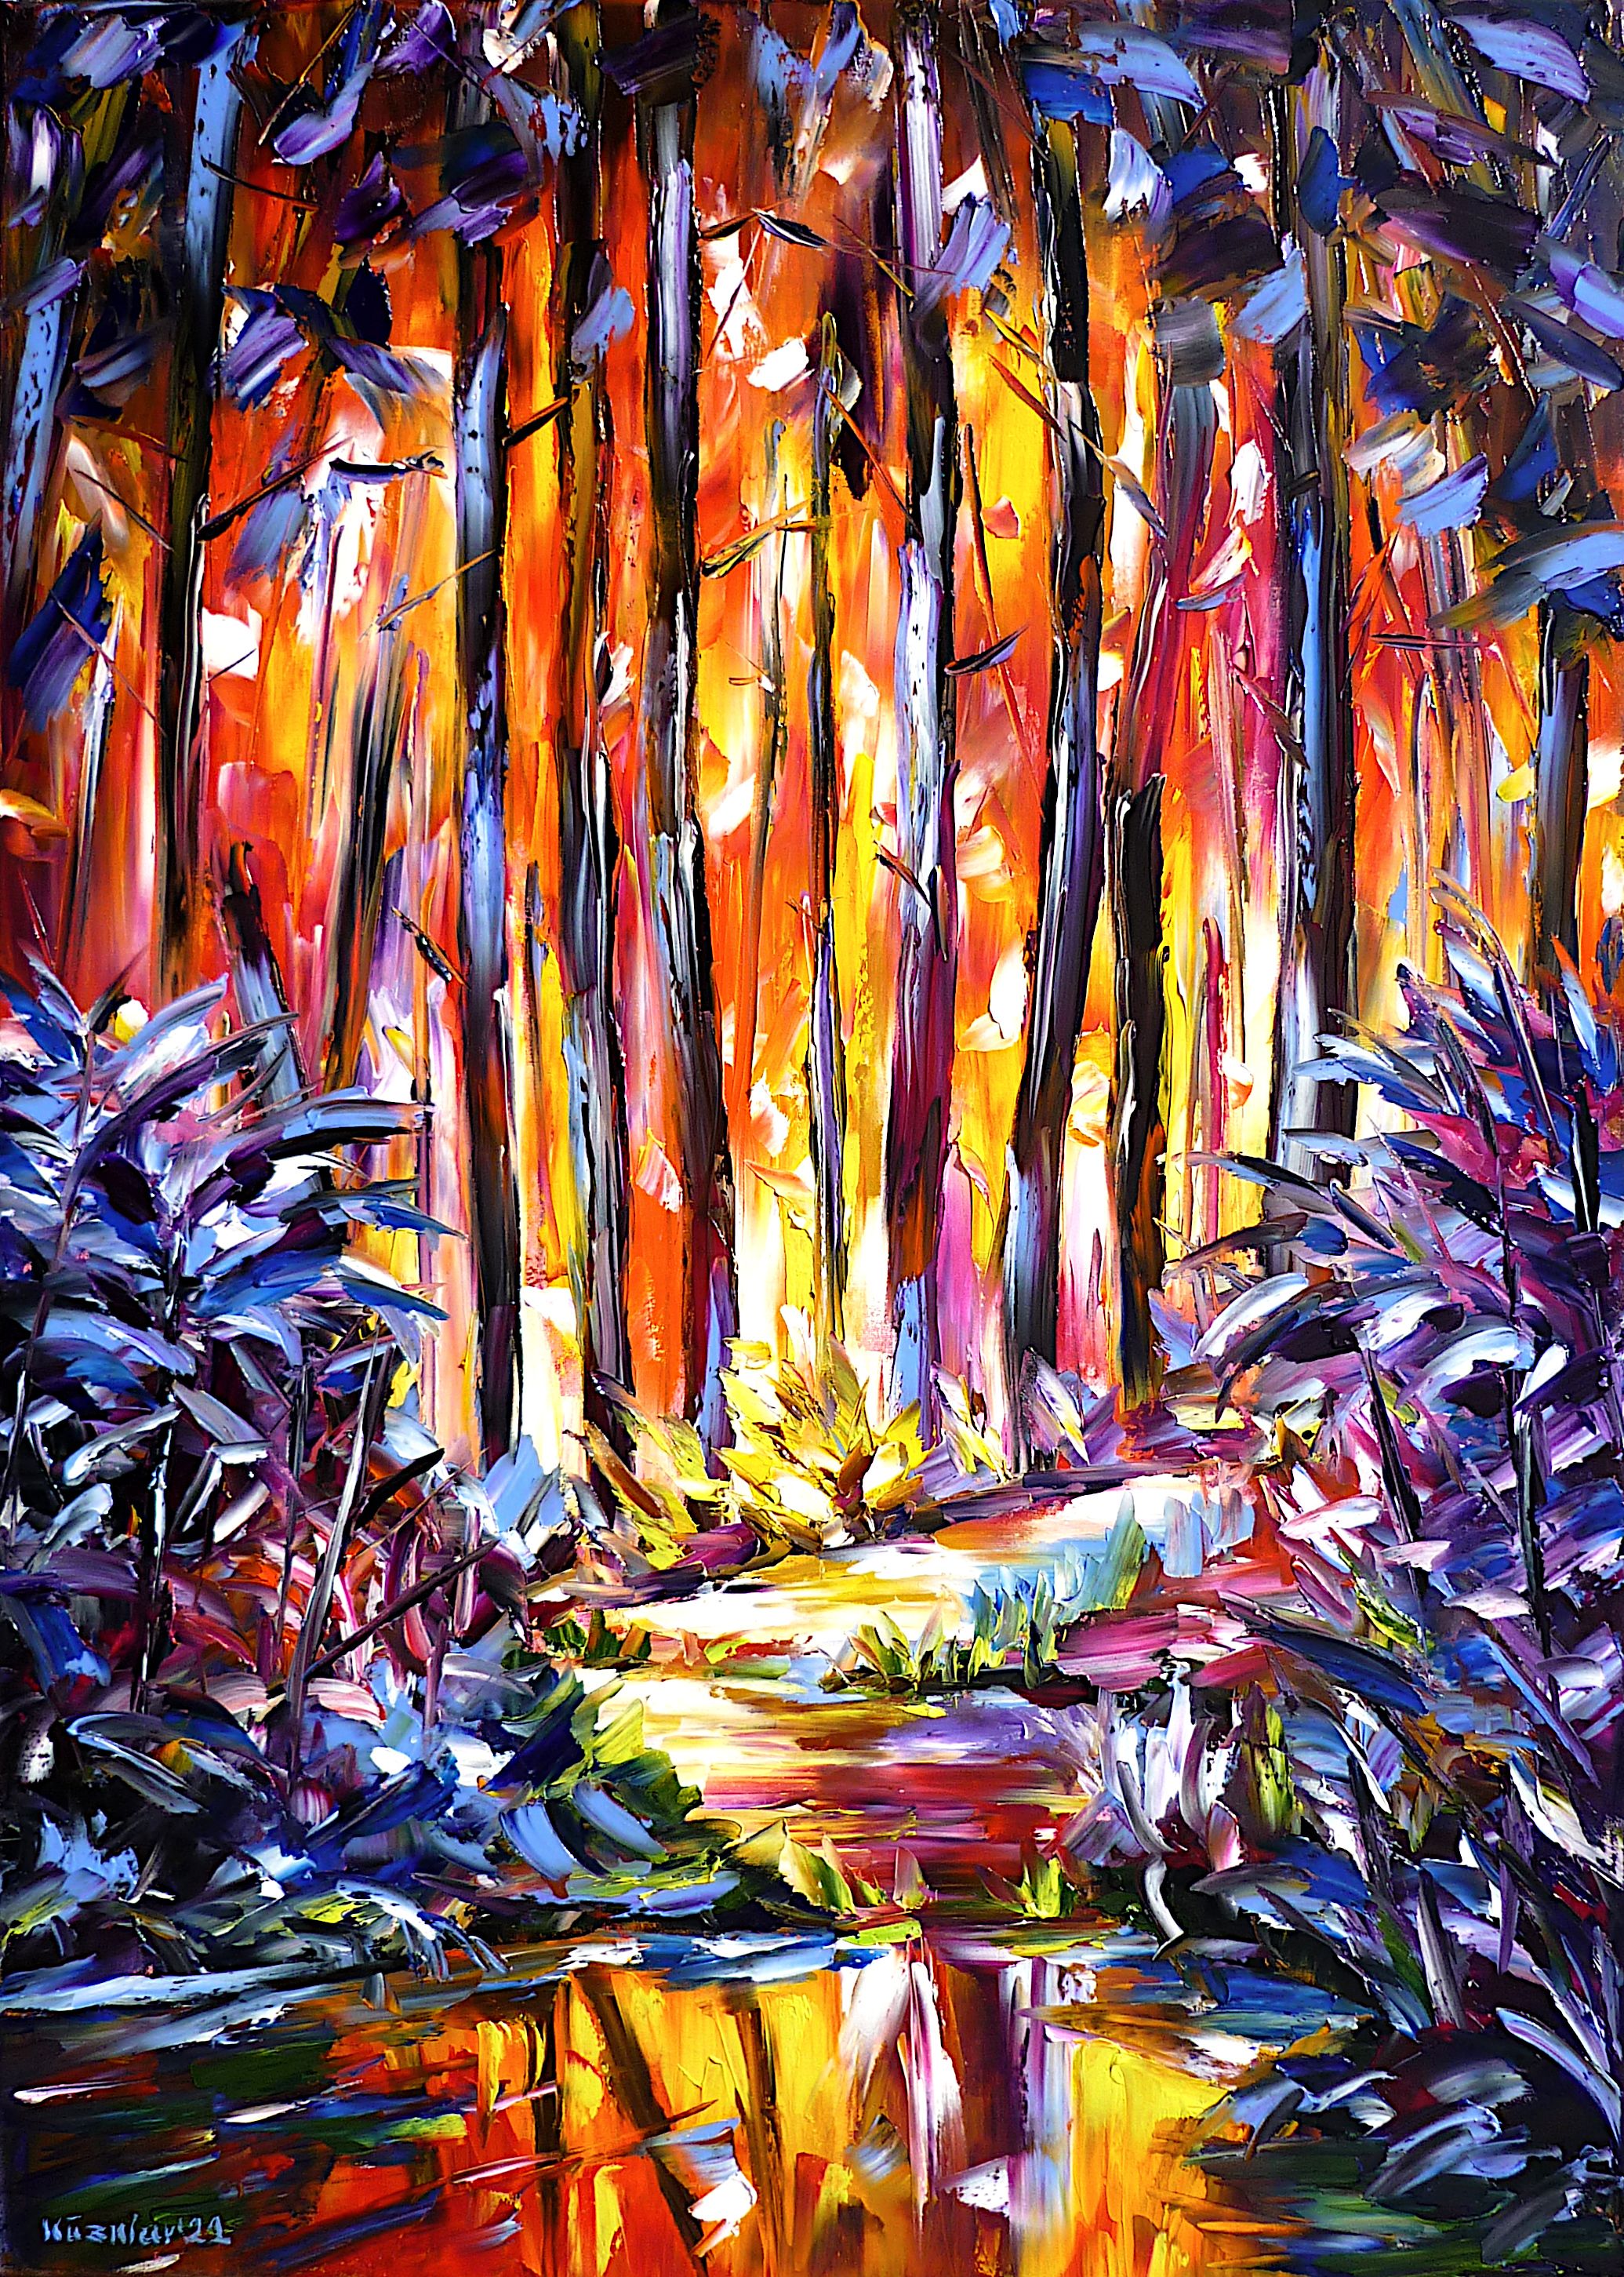 Brook in the forest,creek in the forest,stream in the forest,forest river,river in the forest,forest landscape,forest painting,forest picture,forest abstract,fantasy forest,fairytale forest,ray of light,trees in the sunlight,abstract landscape,landscape painting,brook painting,red forest,red yellow blue,forest love,colorful forest,luminous forest,luminous rays through trees,portrait format,living forest,luminous painting,luminous picture,forest trees,forest beauty,palette knife oil painting,modern art,impressionism,expressionism,abstract painting,lively colors,colorful painting,bright colors,light reflections,impasto painting,figurative